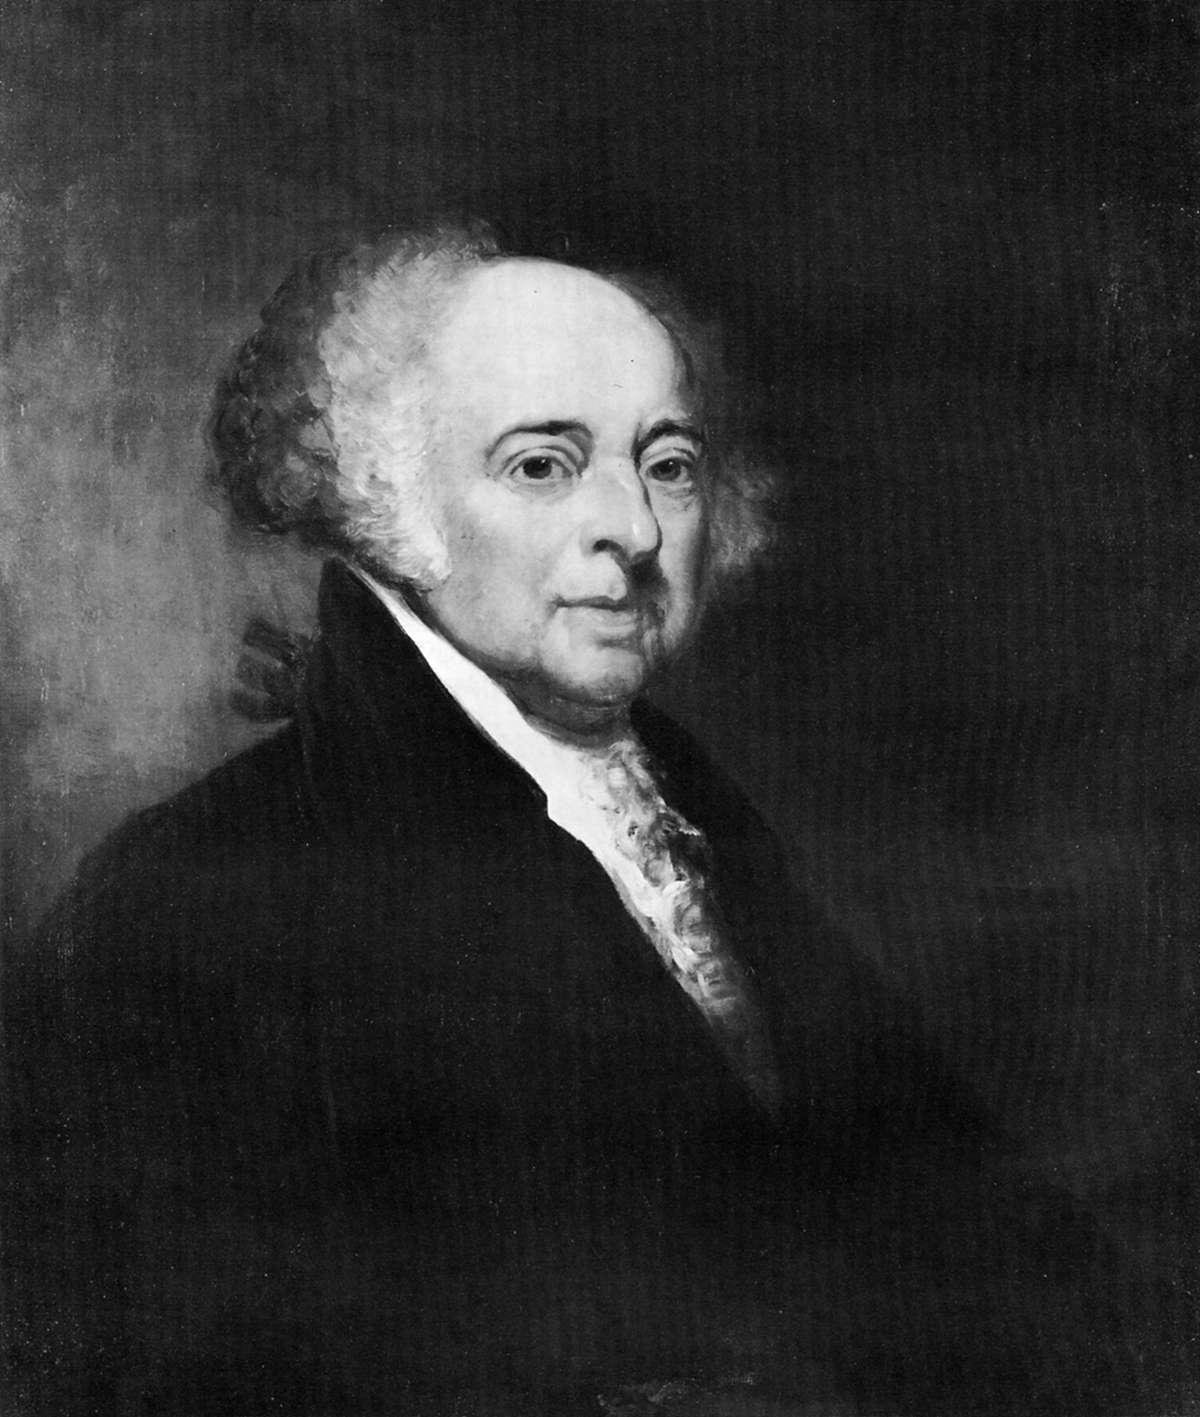 John Adams, second President of the United States